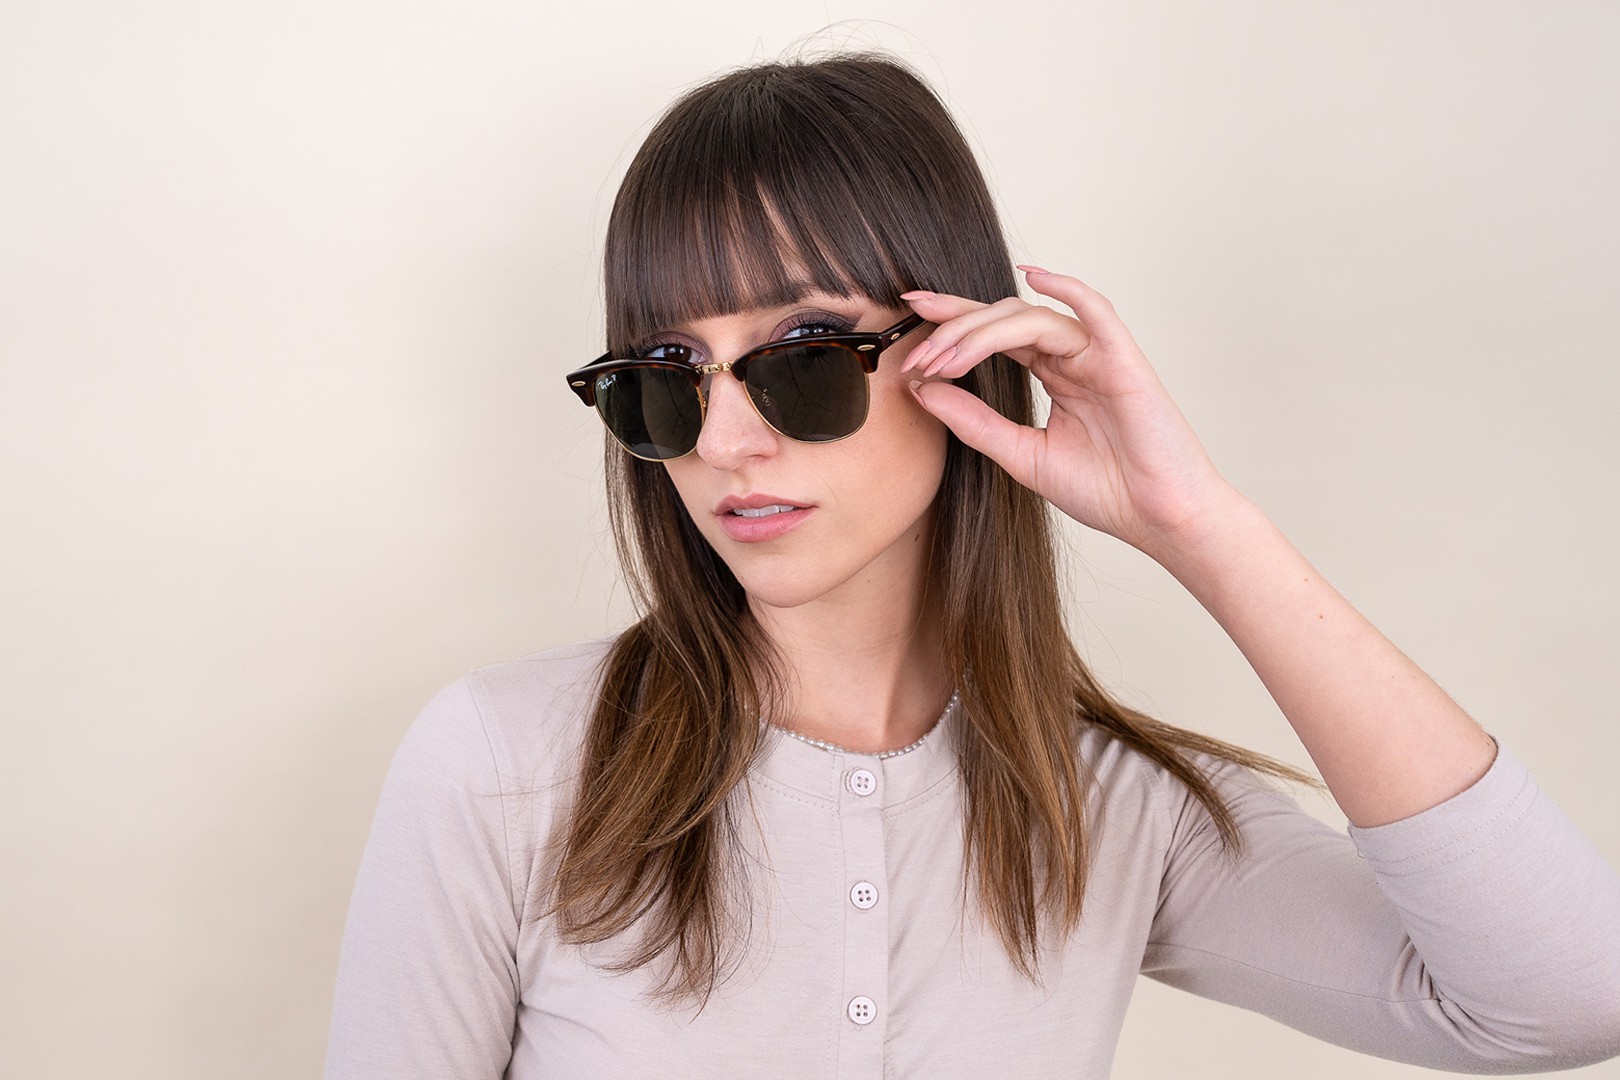 Ray-Ban Clubmaster Sunglasses Review